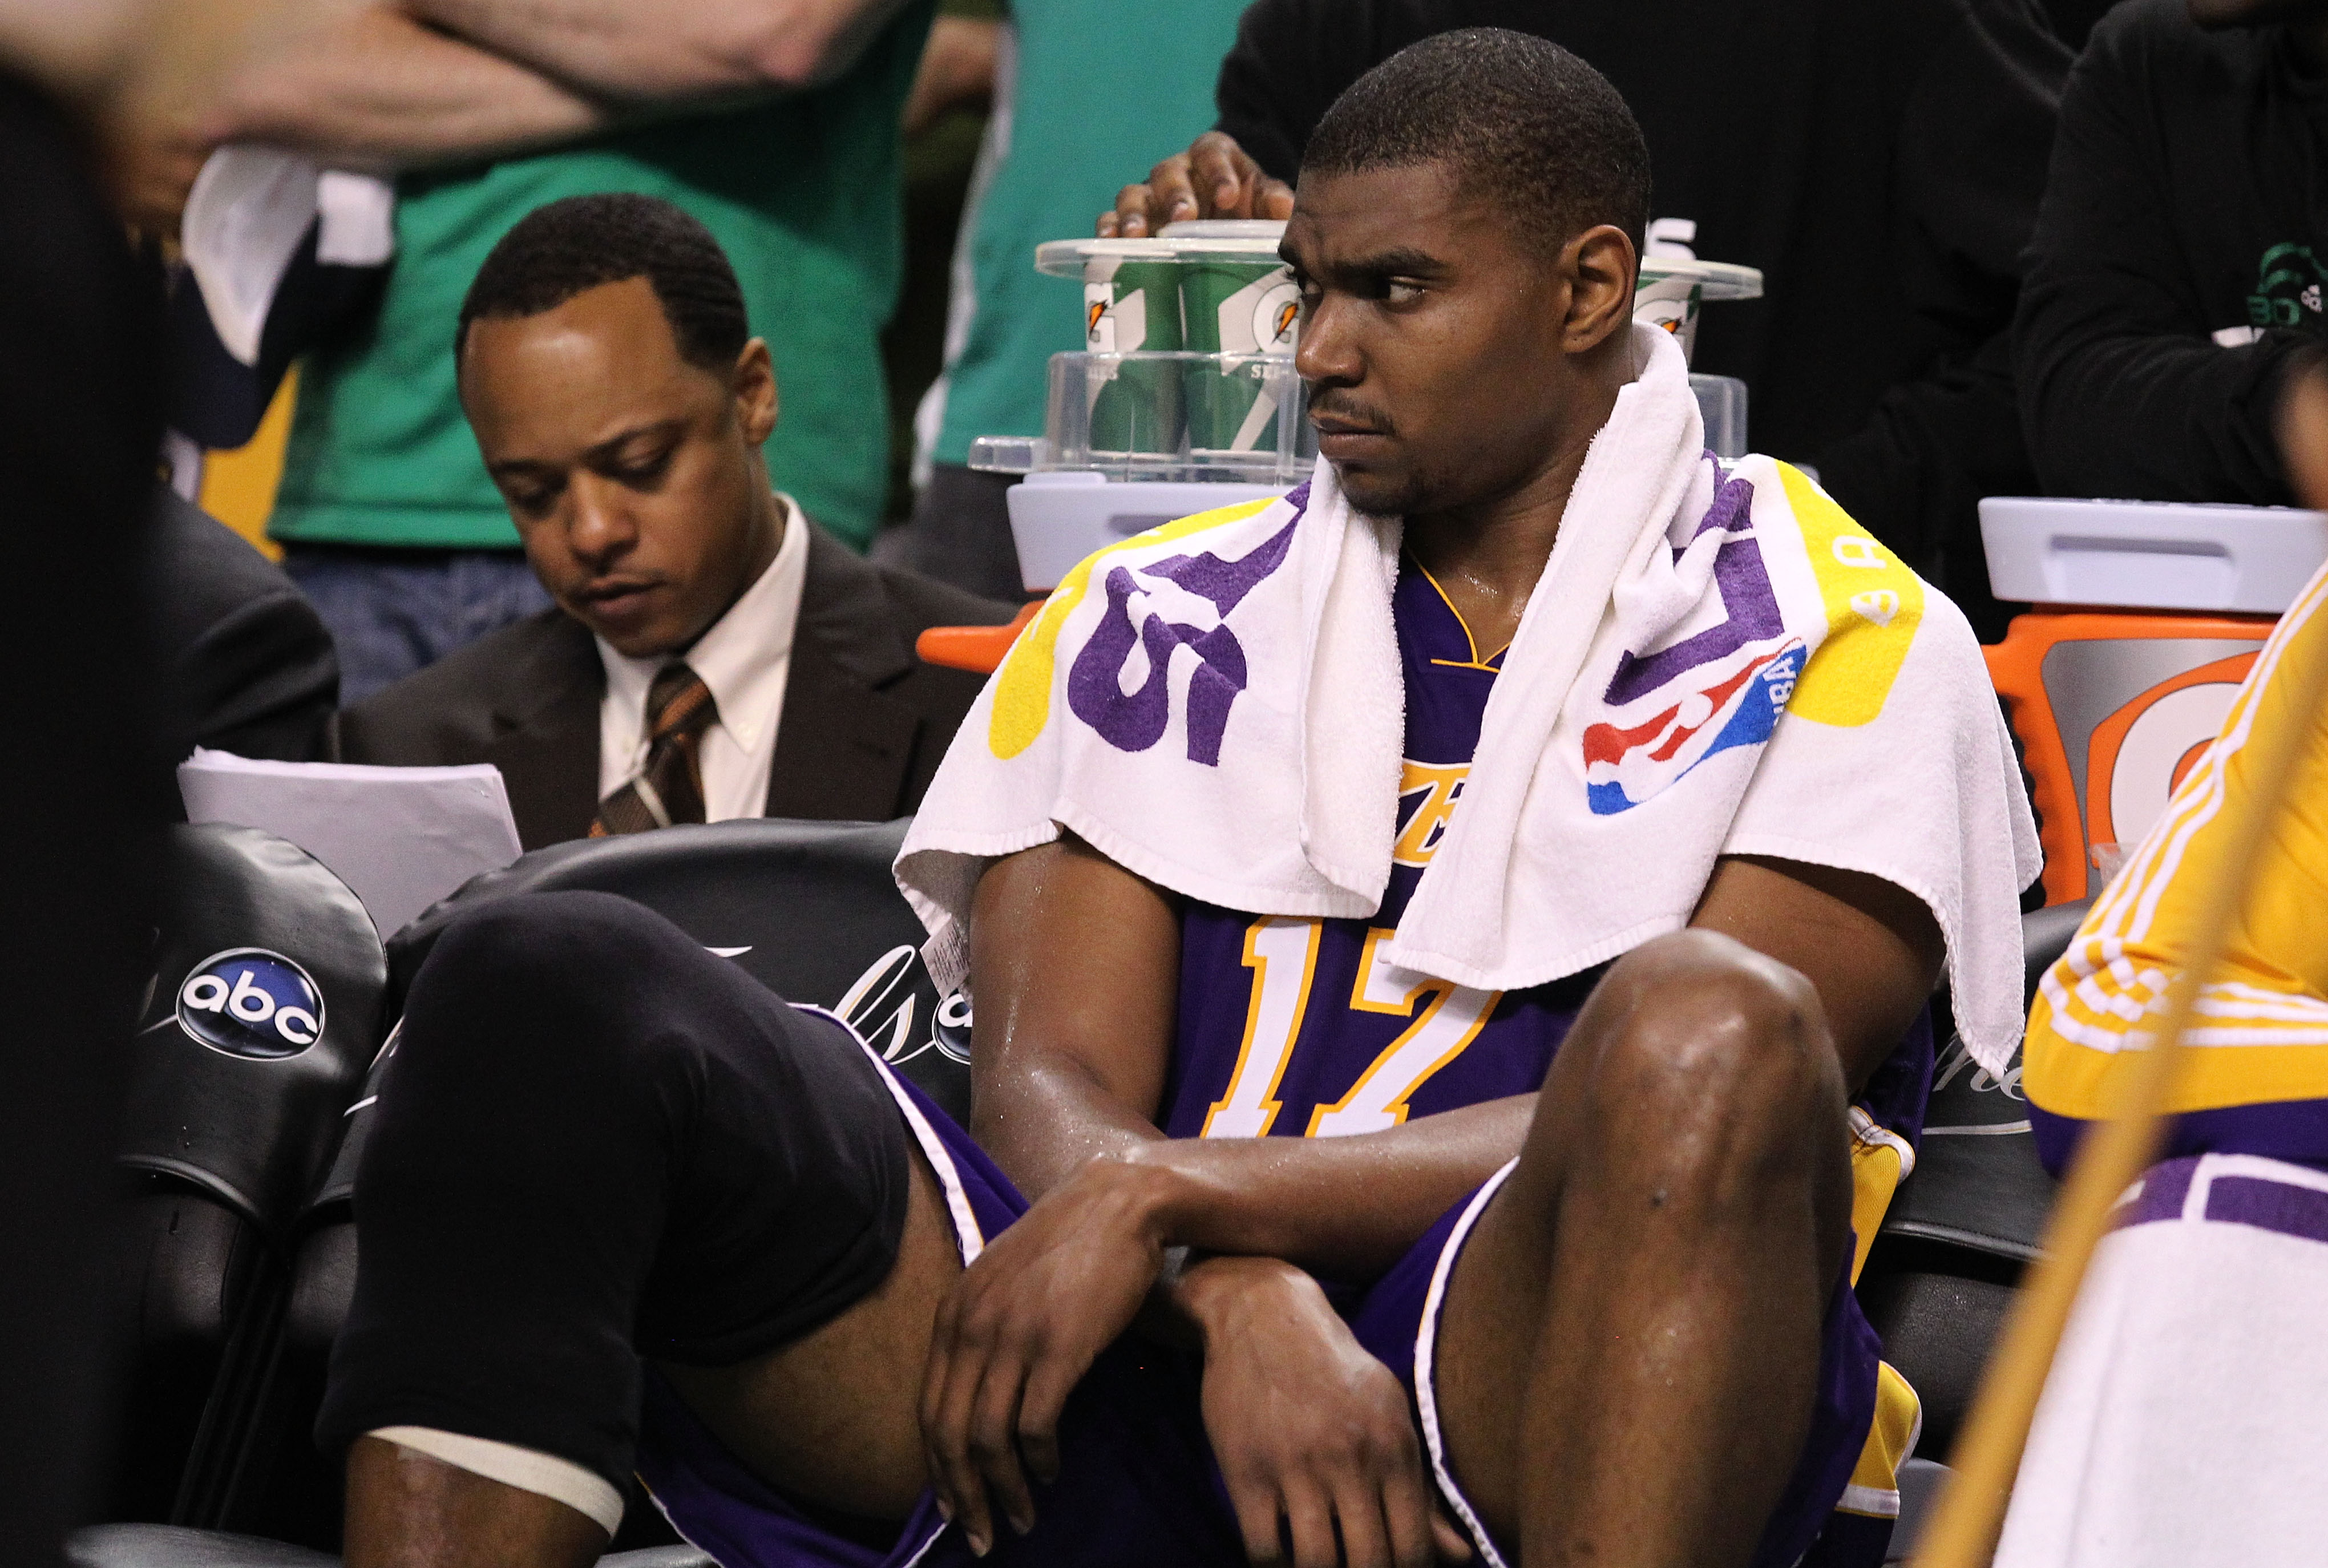 BOSTON - JUNE 13:  Andrew Bynum #17 of the Los Angeles Lakers looks on from the bench in the second half against the Boston Celtics during Game Five of the 2010 NBA Finals on June 13, 2010 at TD Garden in Boston, Massachusetts. NOTE TO USER: User expressl